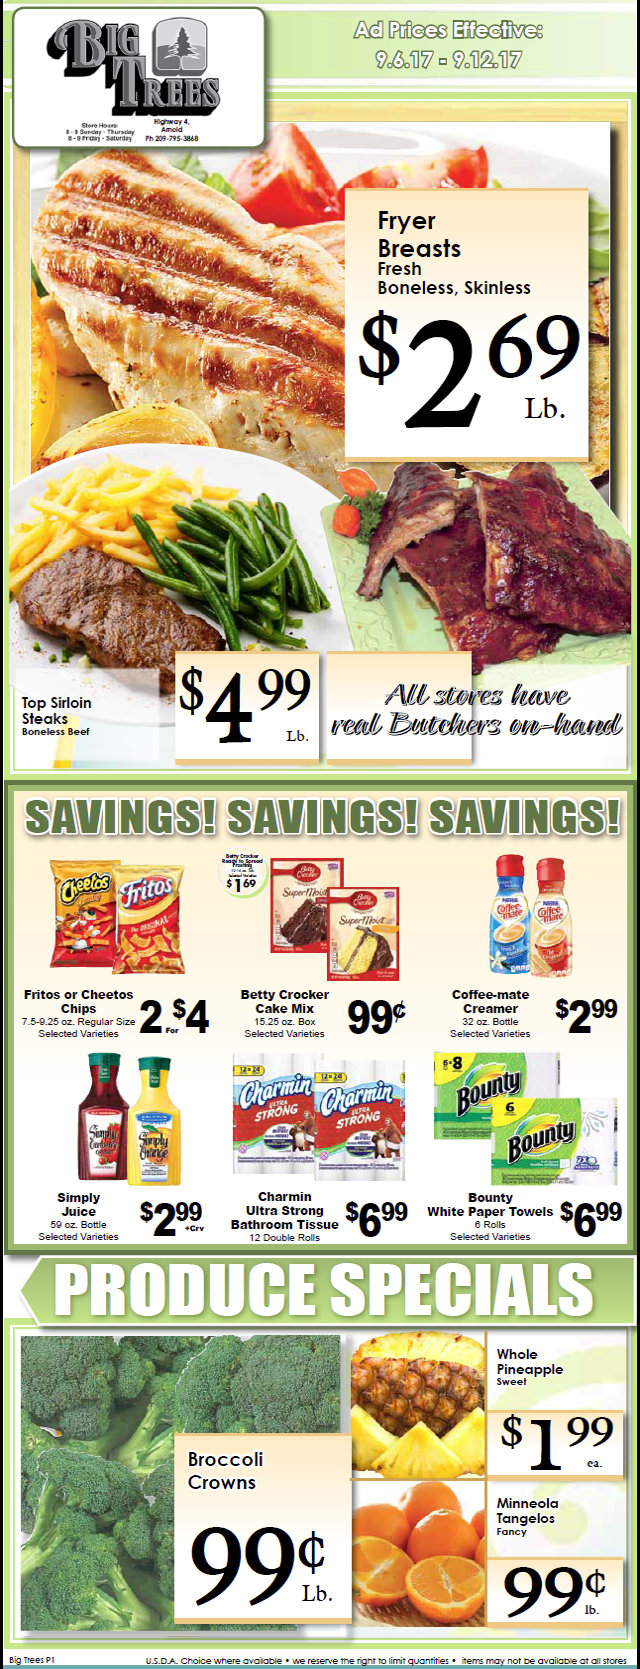 Big Trees Market Weekly Ad and Grocery Specials Through September 12